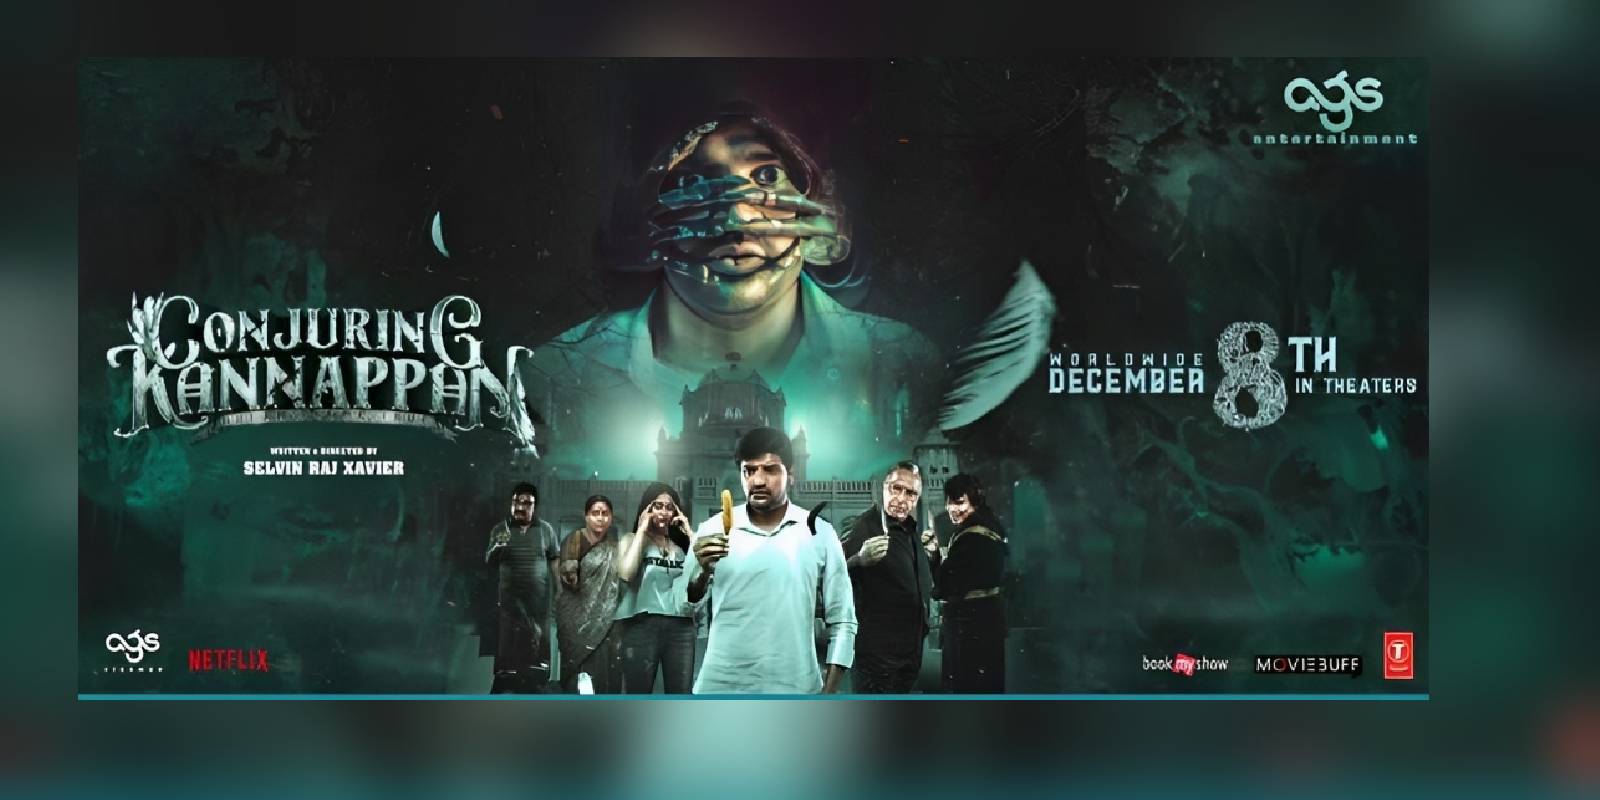 A poster of the film Conjuring Kannappan